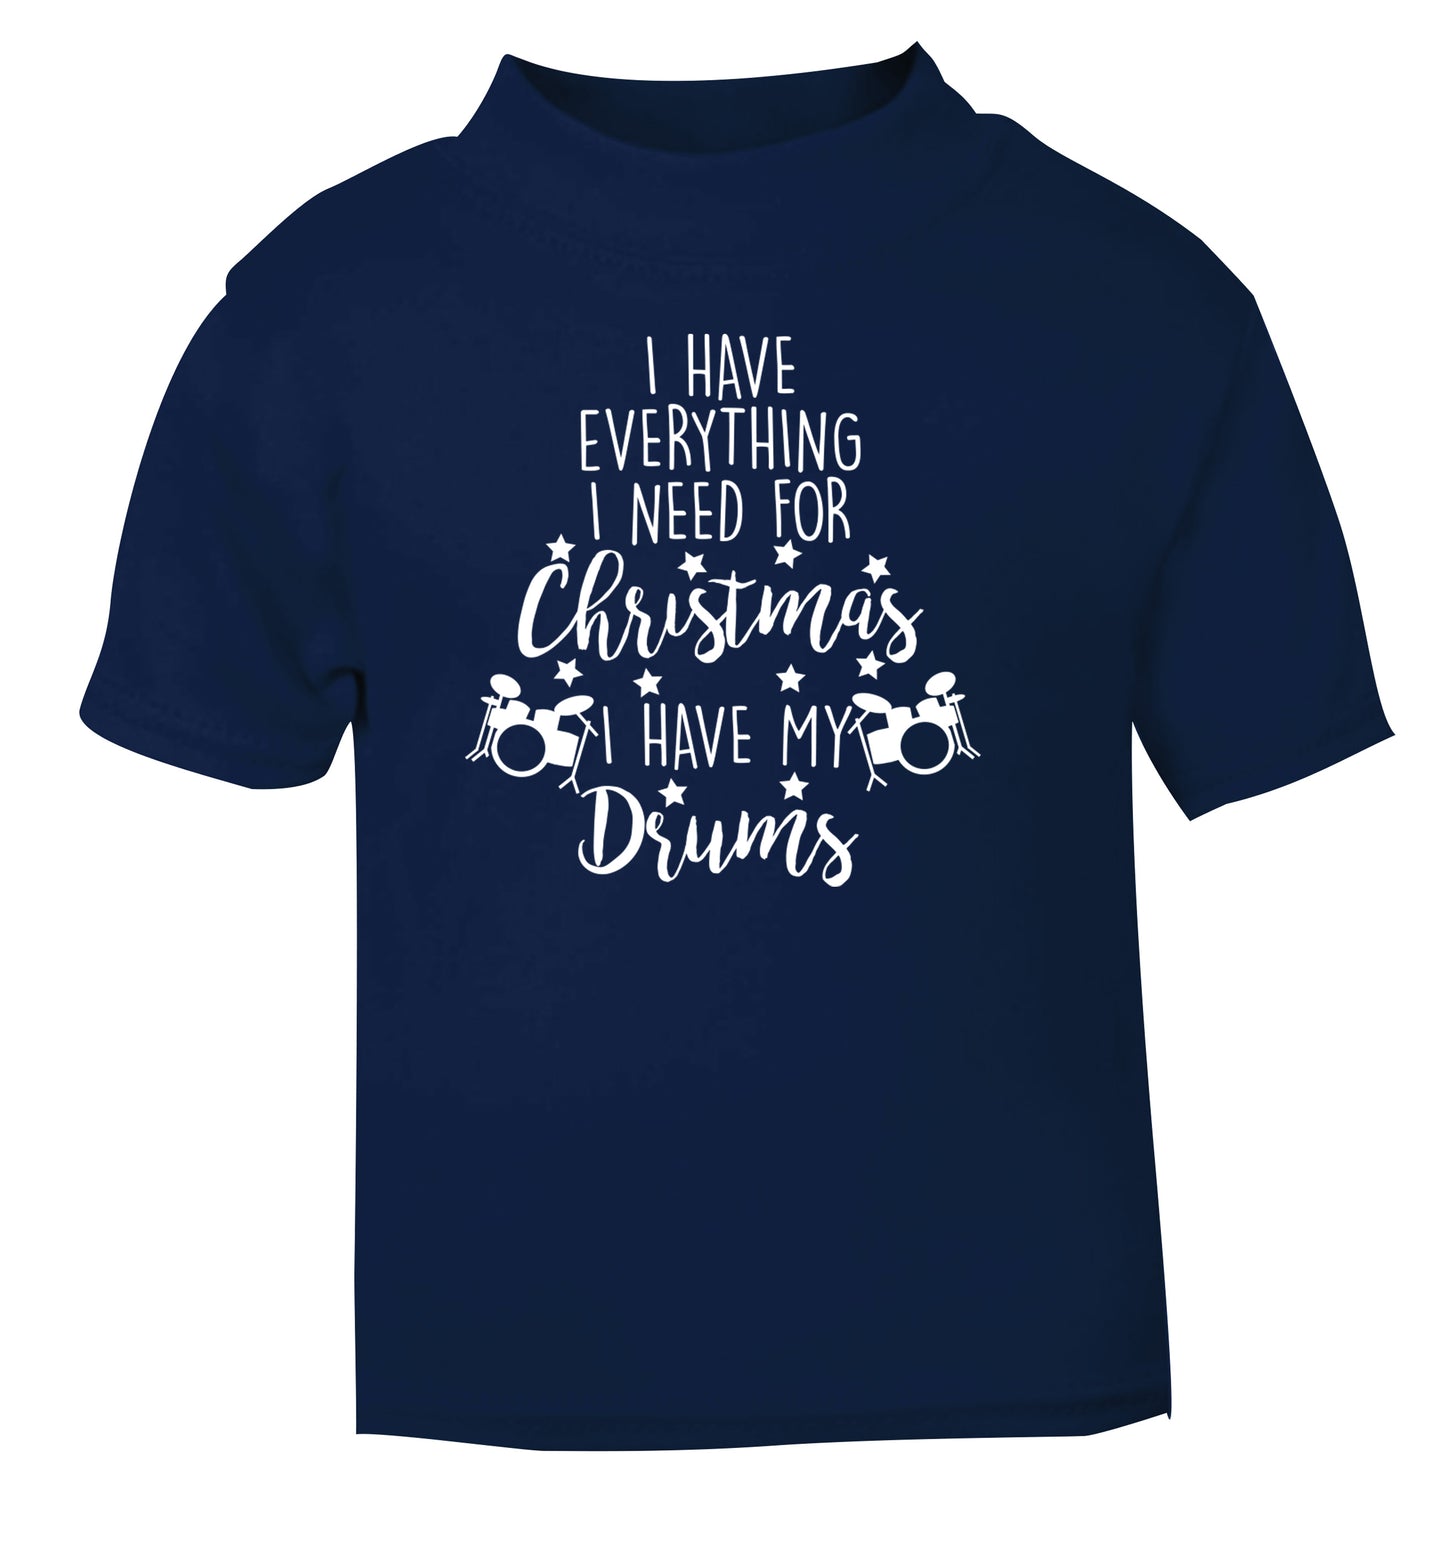 I have everything I need for Christmas I have my drums! navy Baby Toddler Tshirt 2 Years